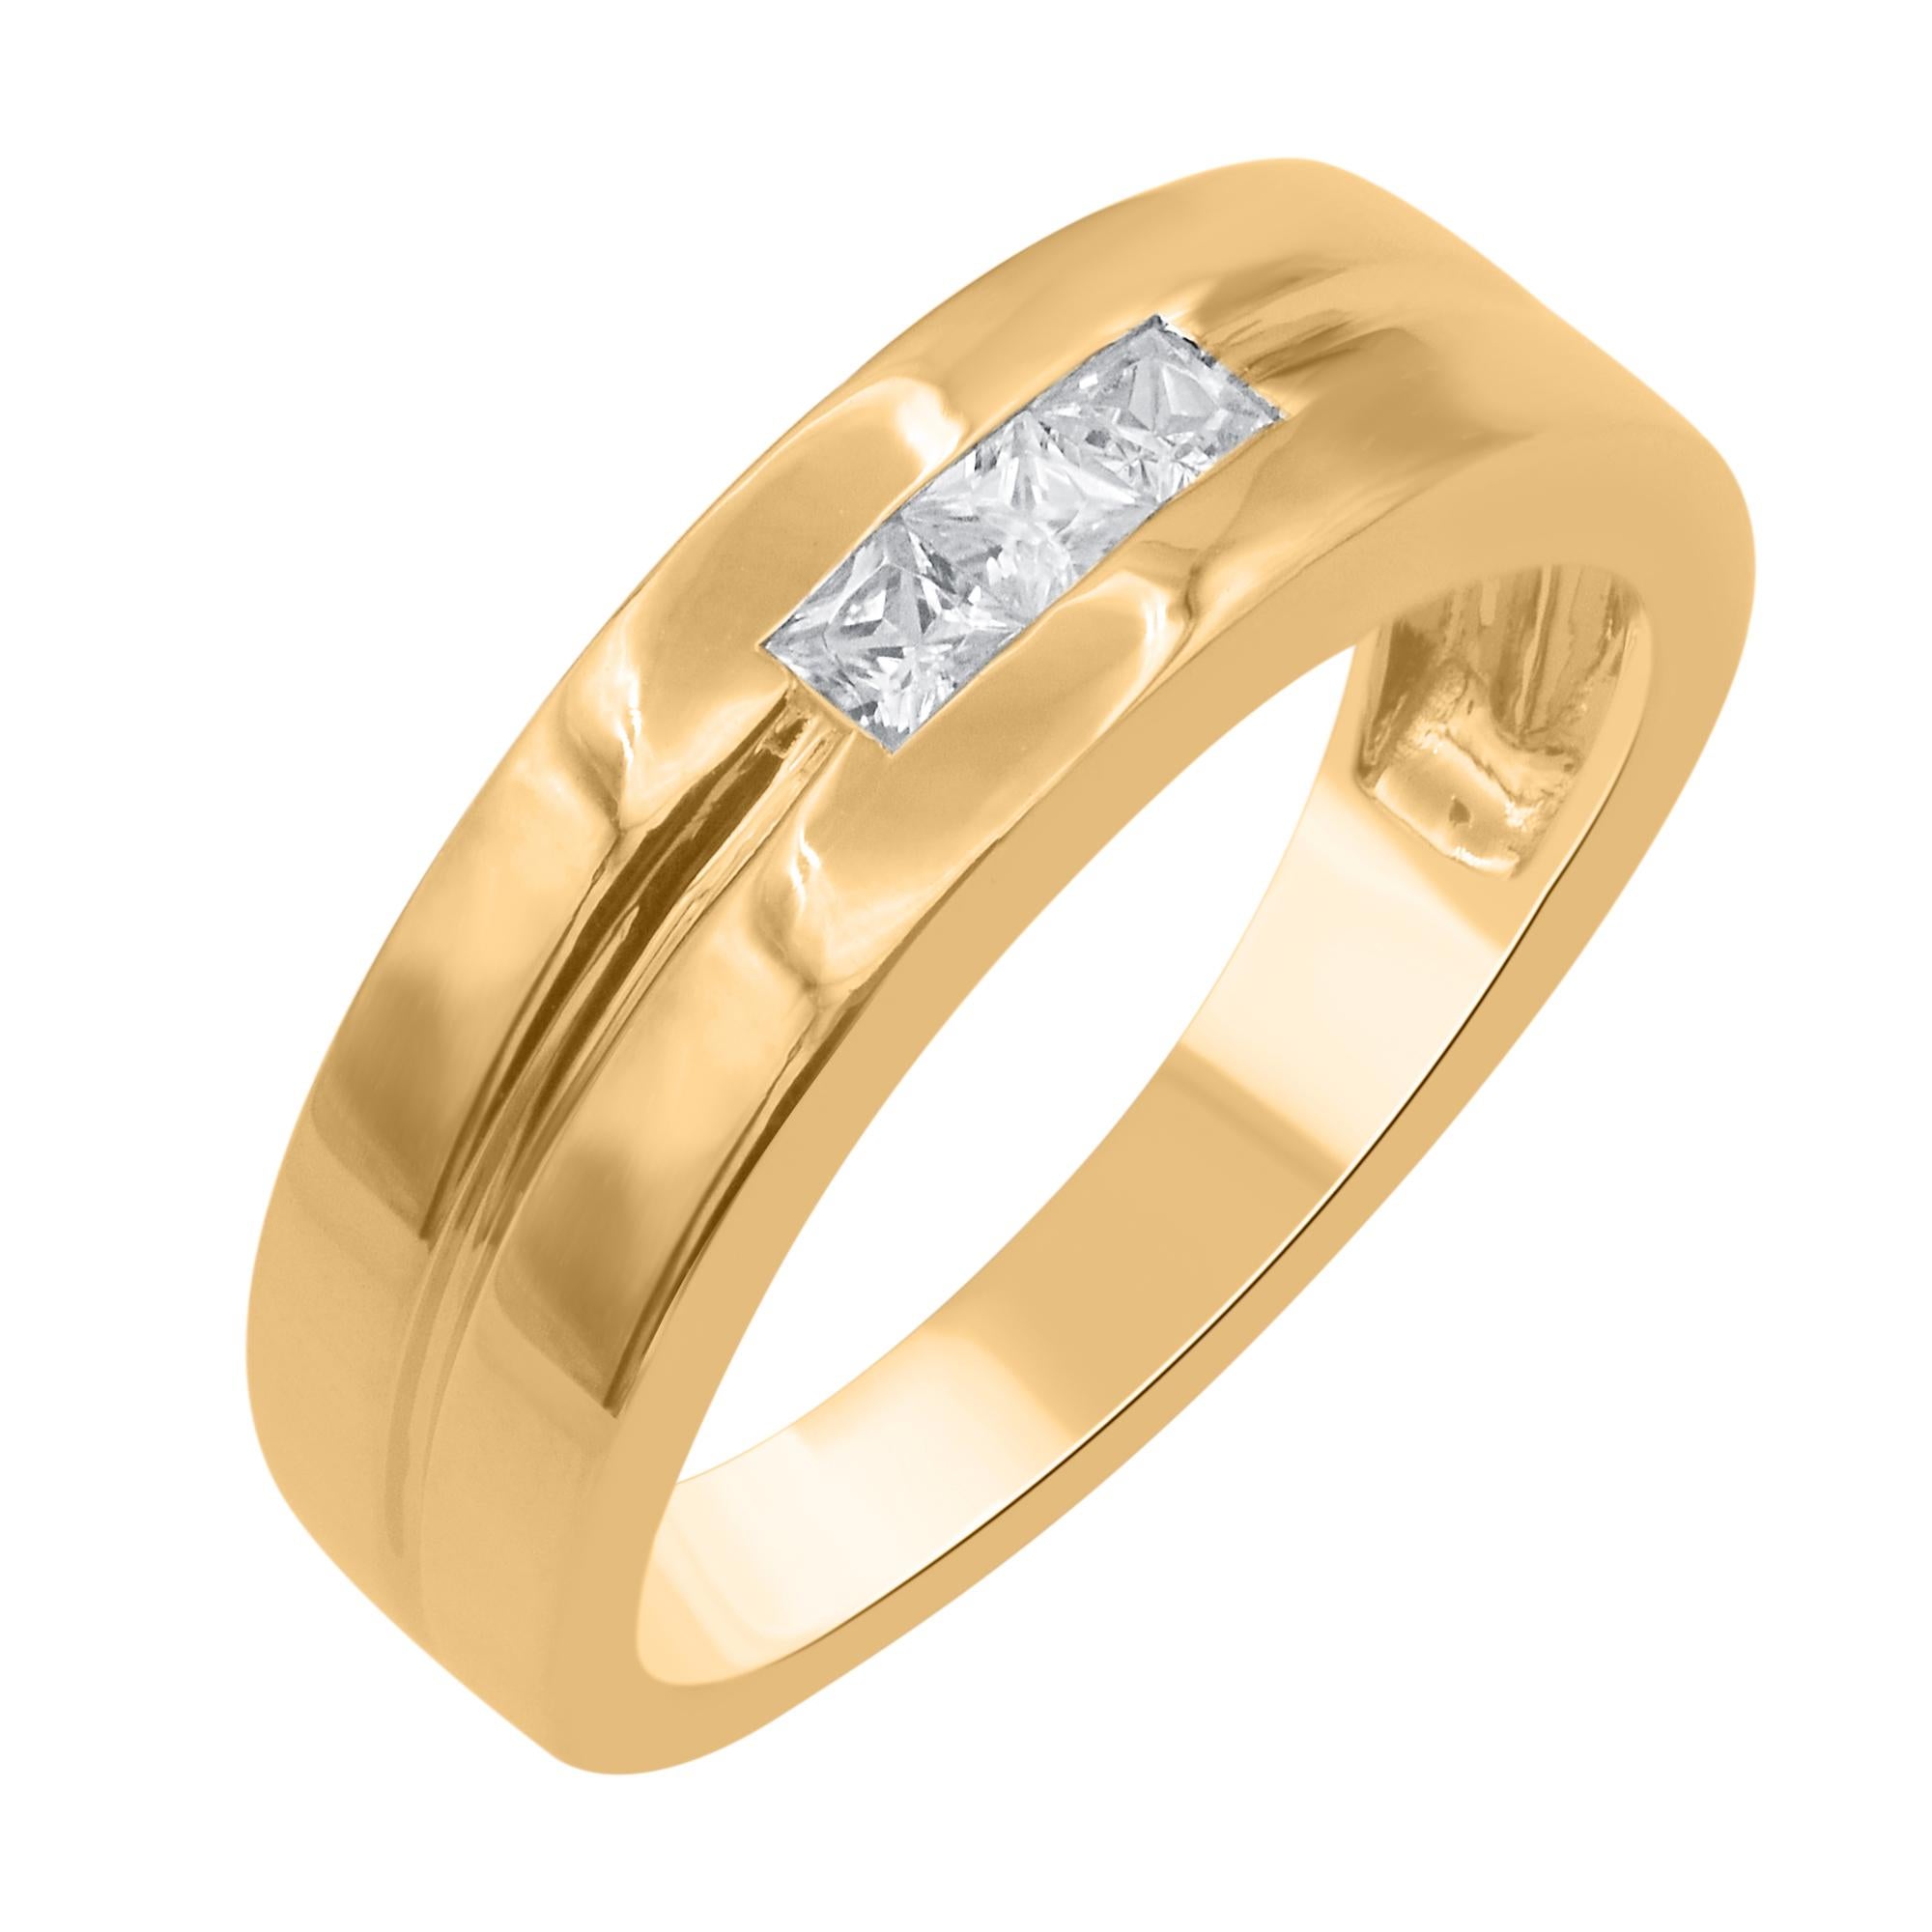 This men's wedding band ring features 3 striking channel-set diamonds set at the center of the ring. This band shines with 0.30 carat of princess cut diamonds. The white diamonds are graded as H-I color and I-2 clarity.